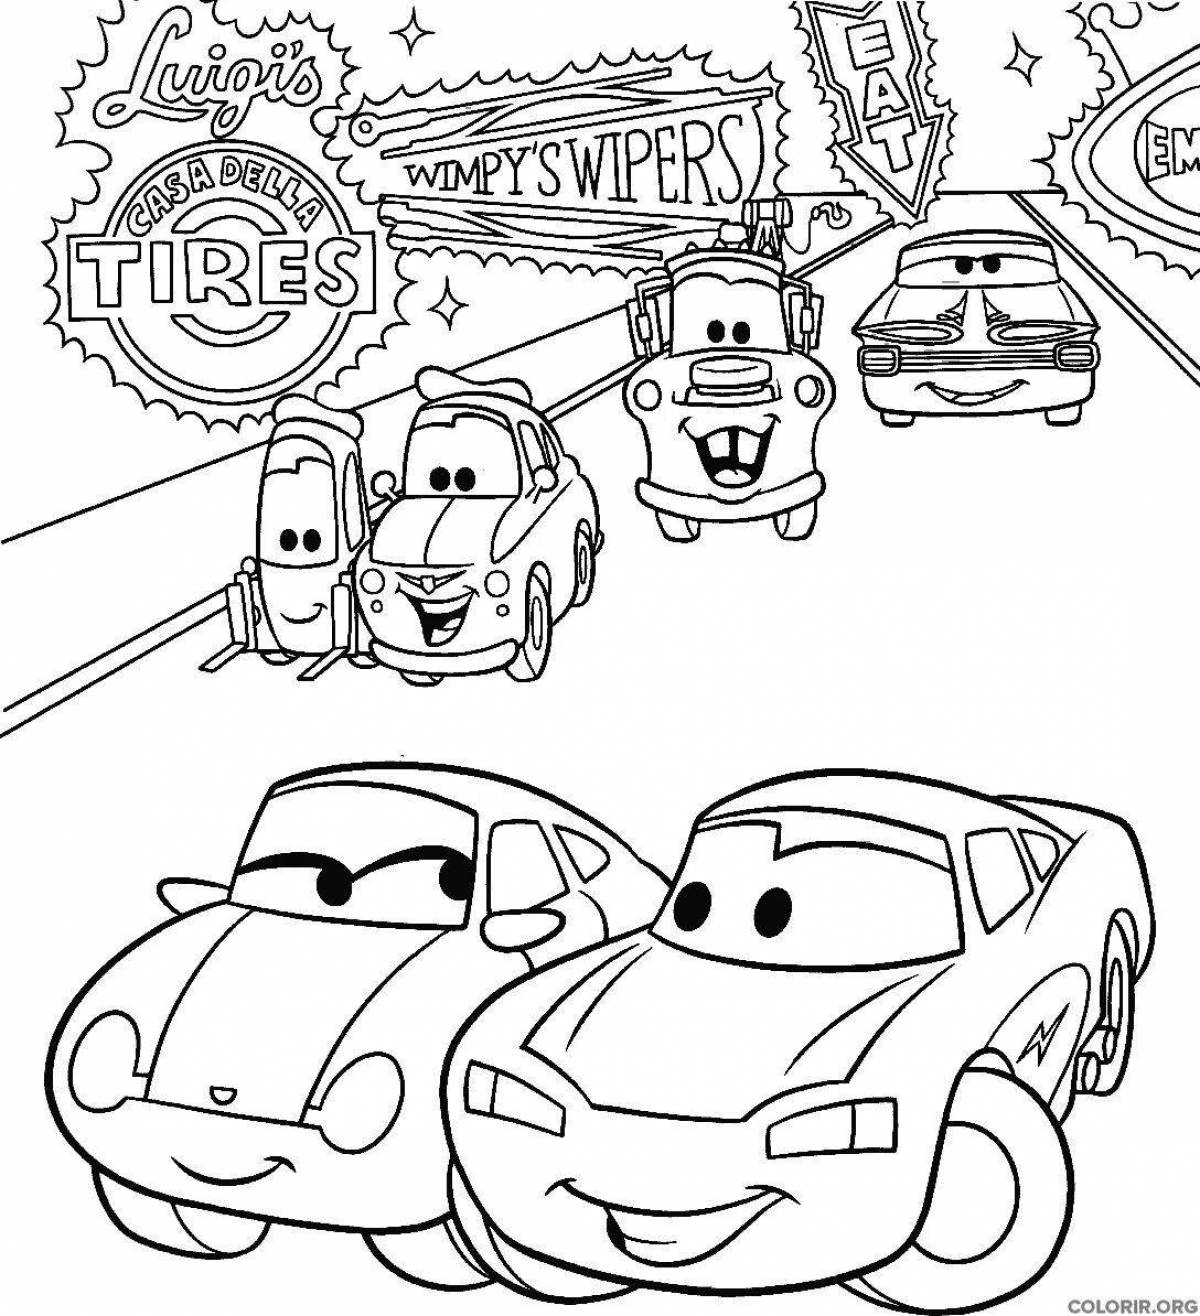 Coloring page charming sheriff's car